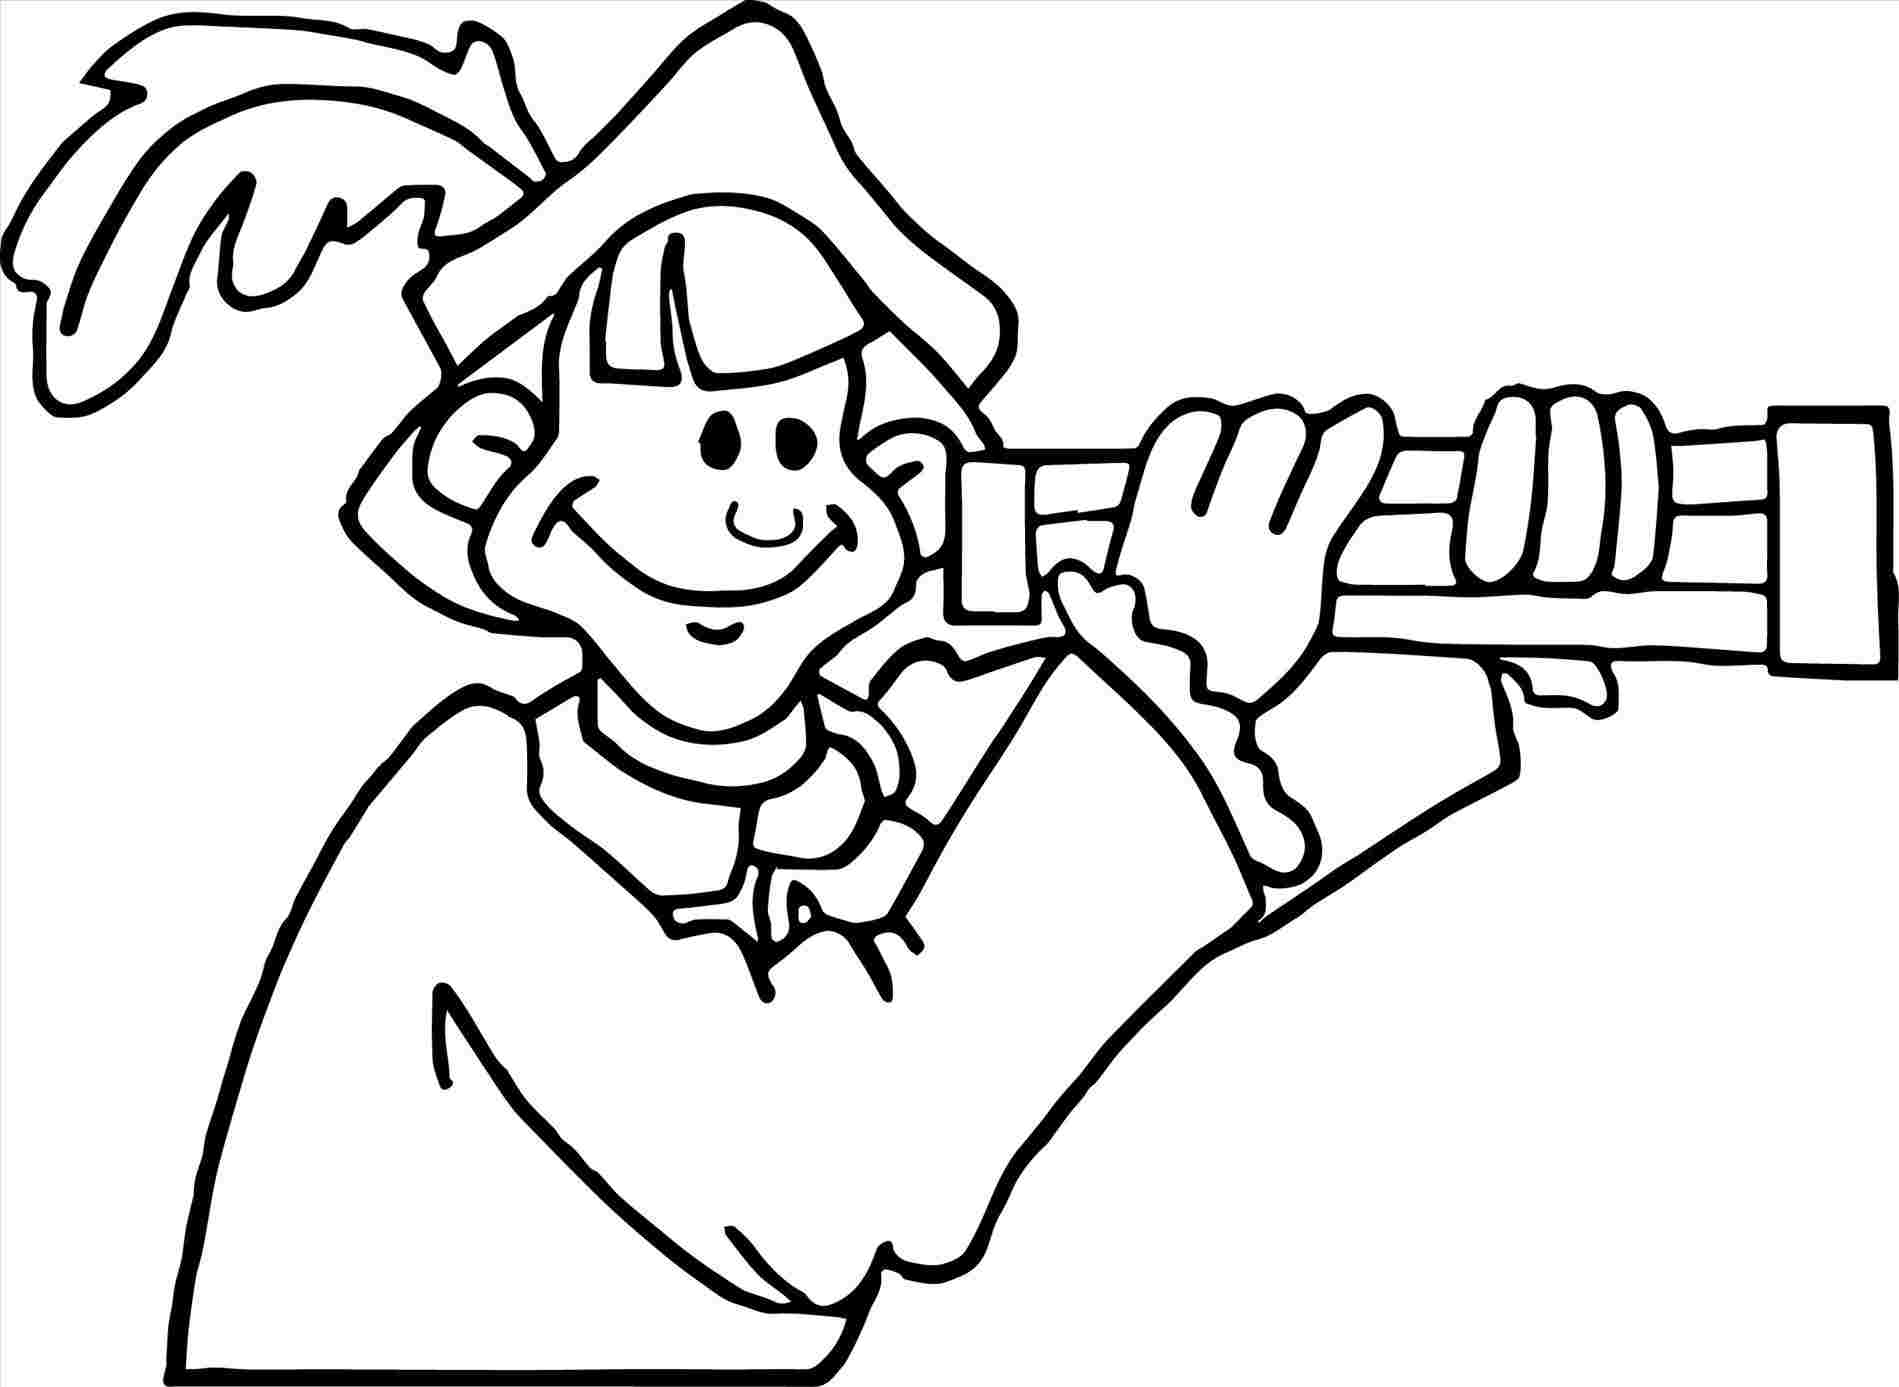 Christopher Columbus Coloring Pages Rhpinterestcom Coloring Pages Collection Free